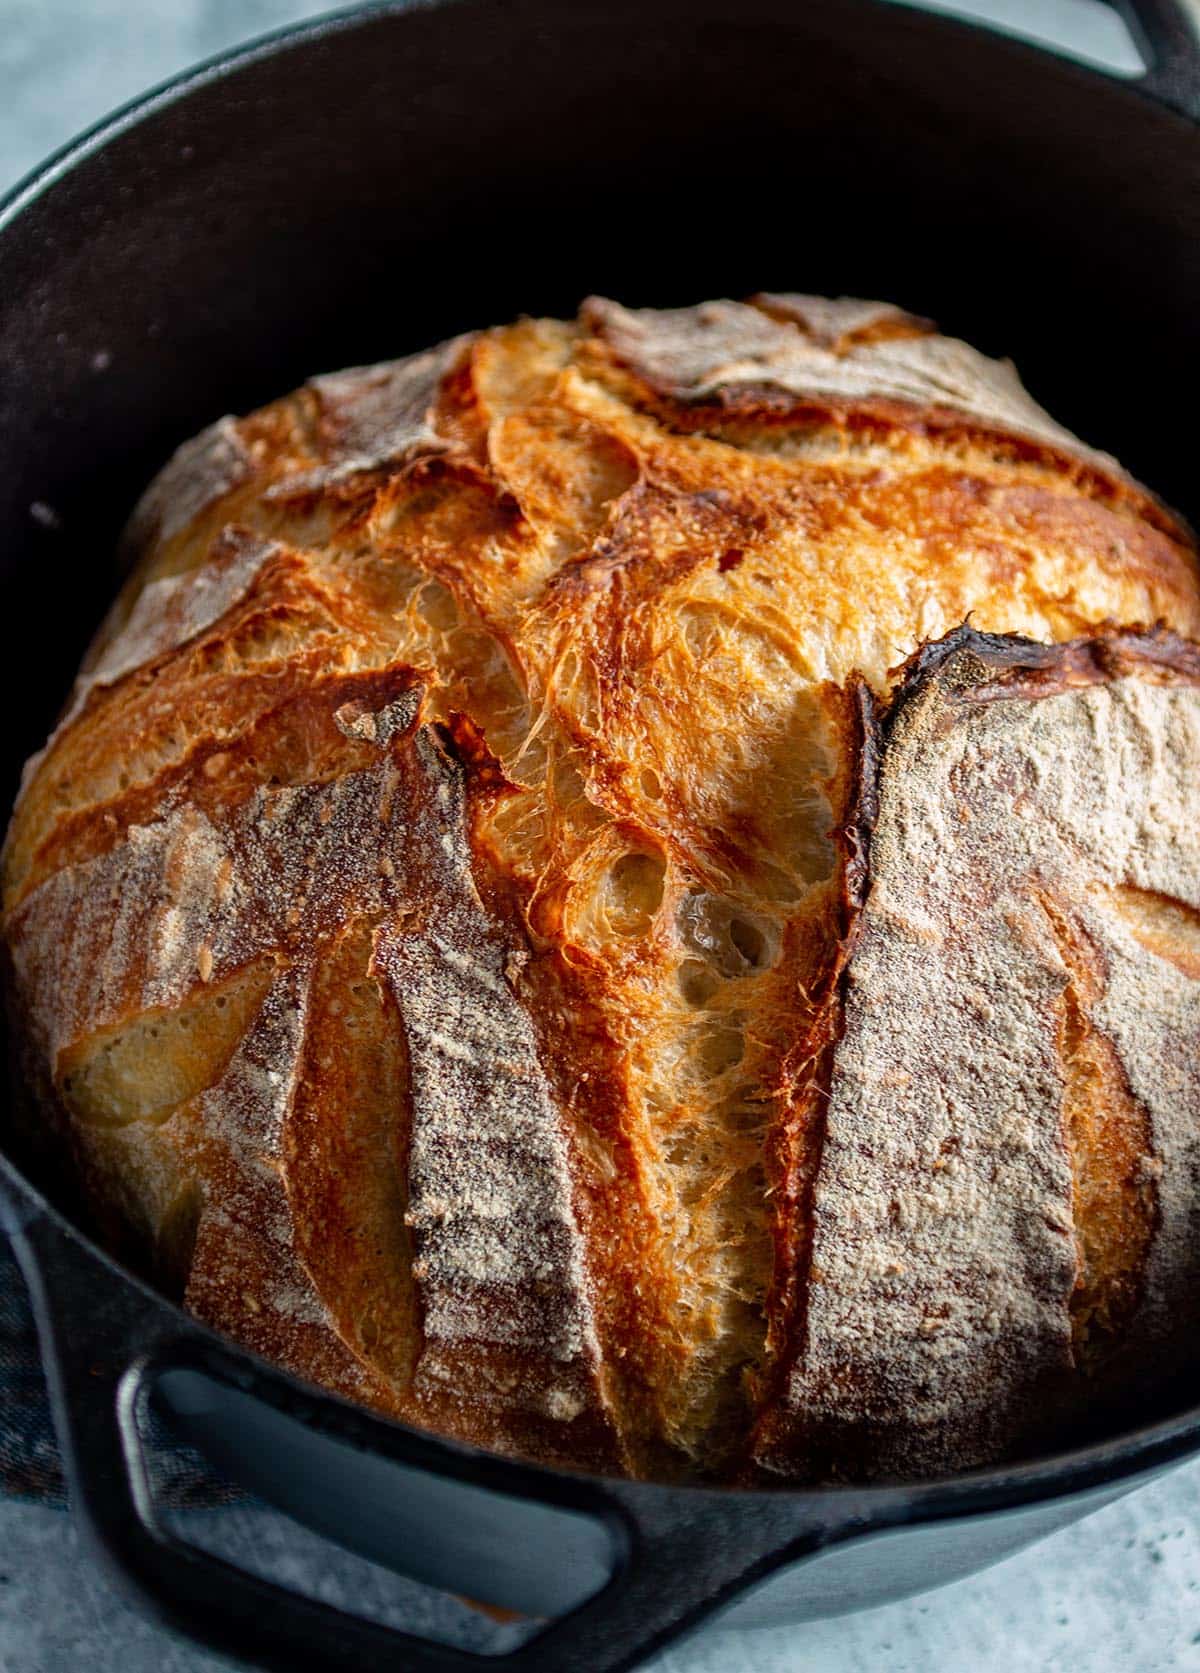 The Best Dutch Oven for Baking Bread - Dirt and Dough